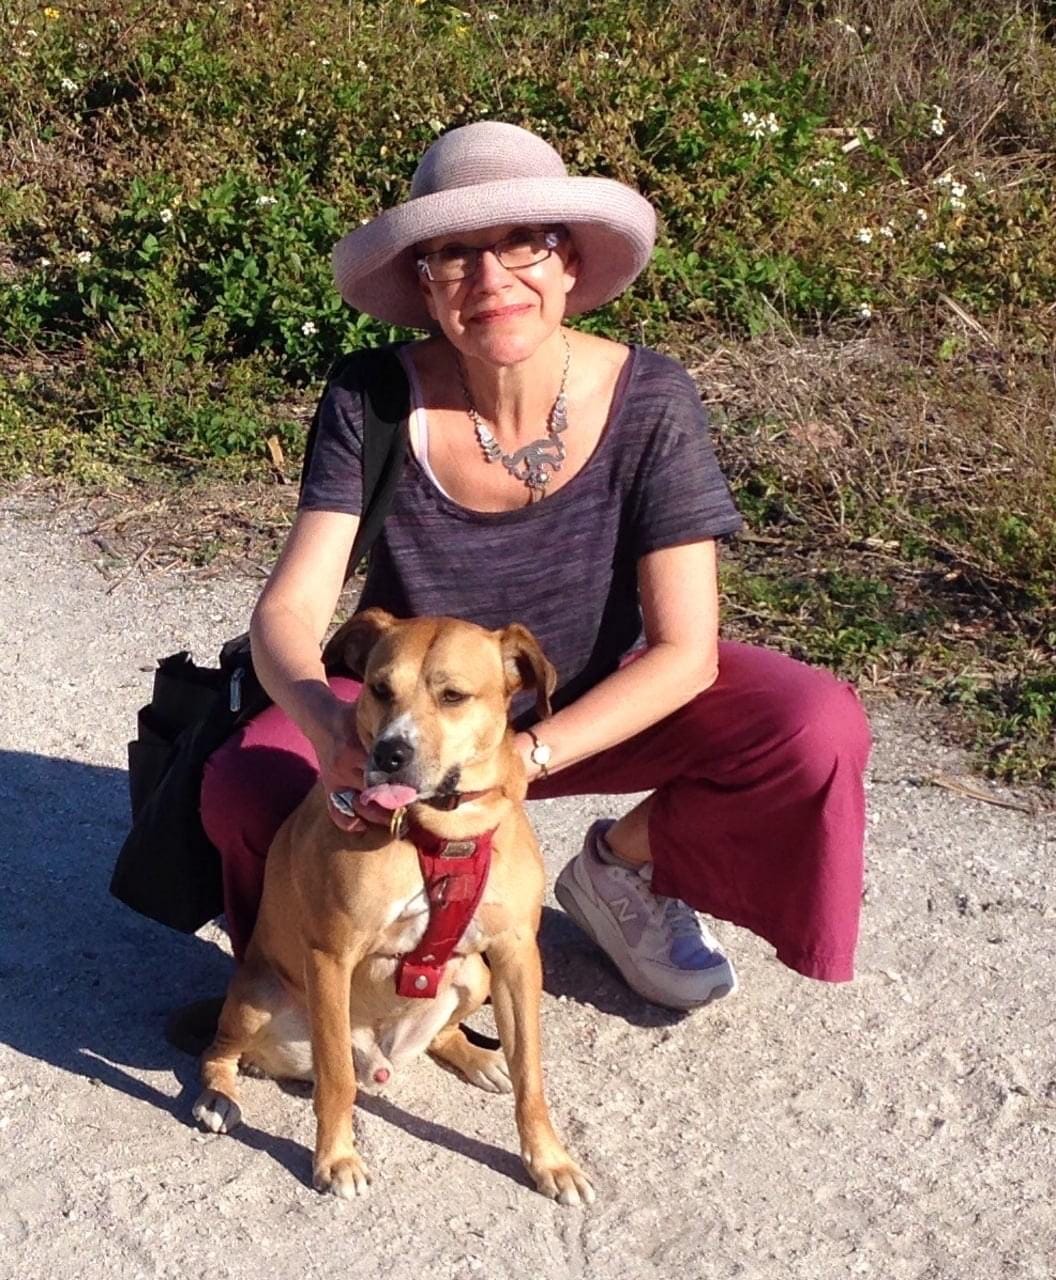 A woman in a sunhat (Rona Maynard) crouches on a trail with ginger dog in a red harness.